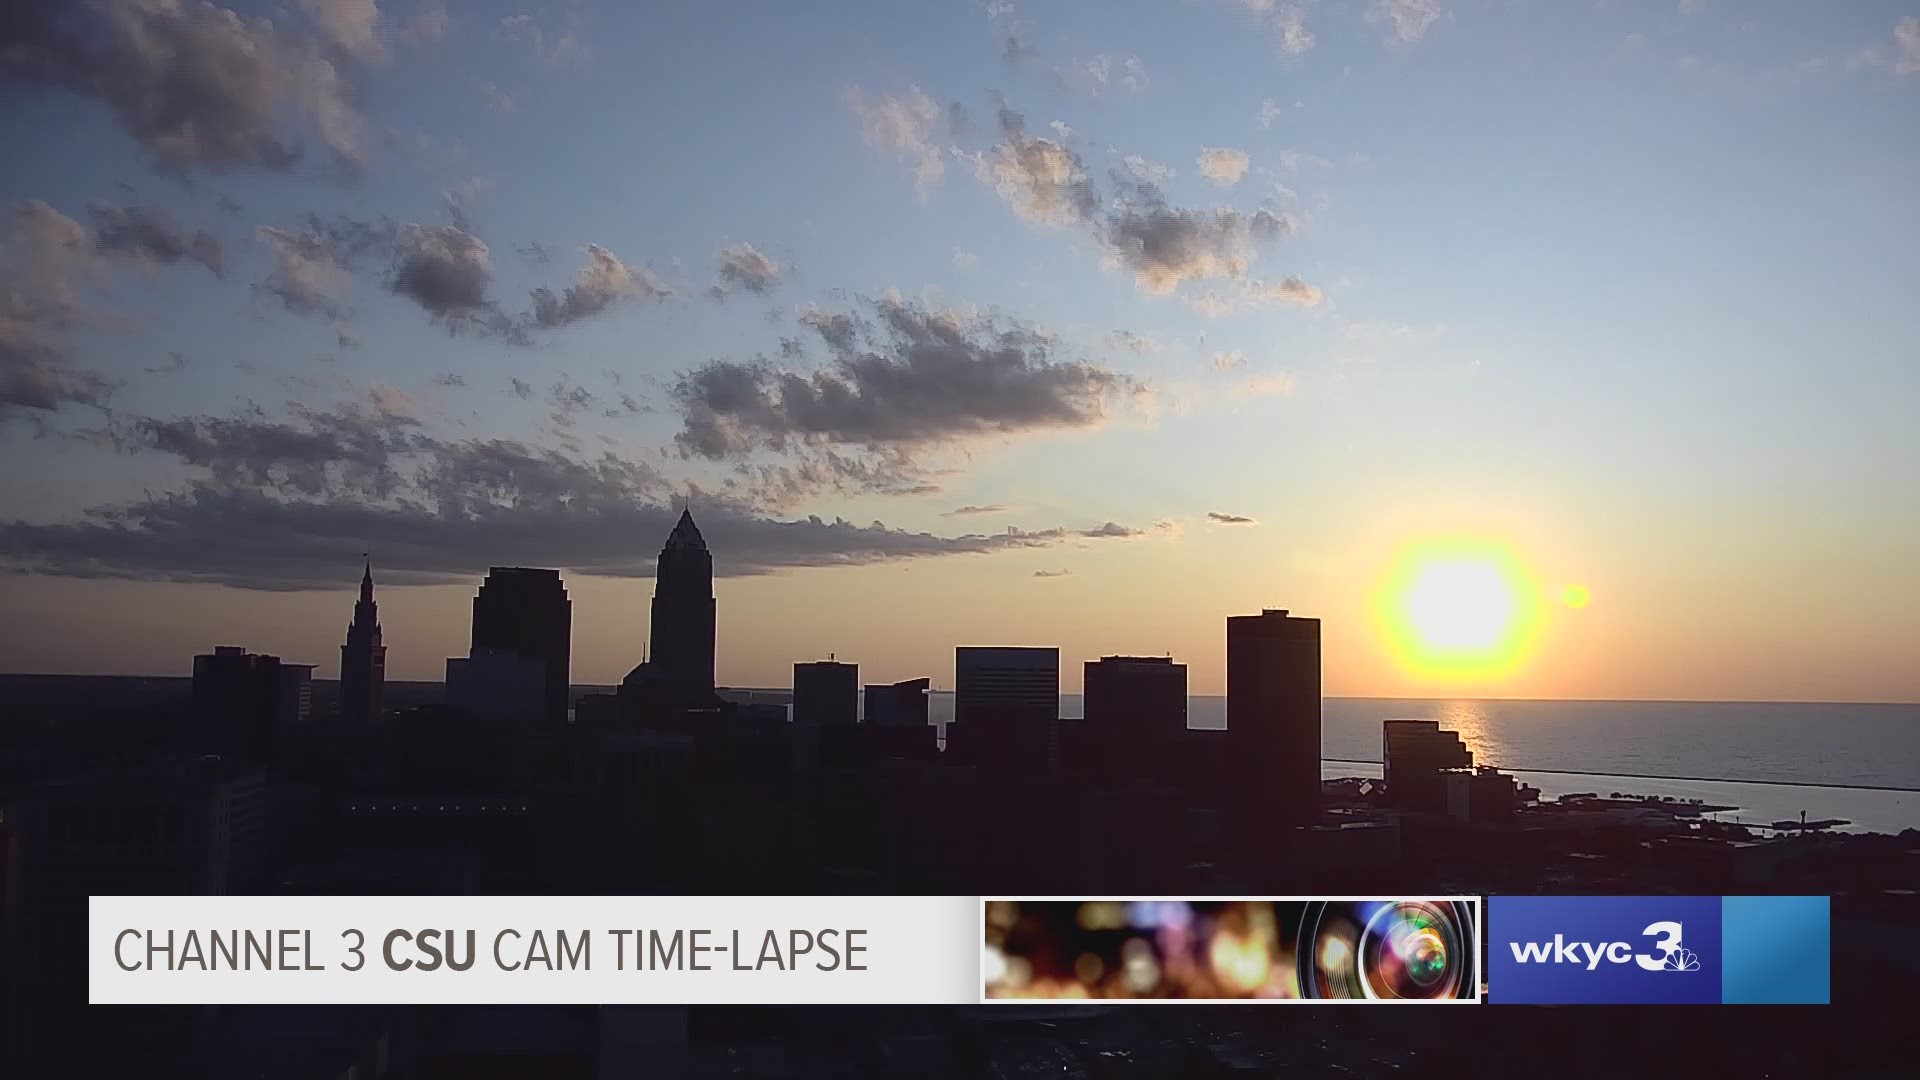 Take :30 seconds and enjoy tonight's Cleveland sunset time-lapse for August 8, 2019, from the Channel 3 CSU Cam. Are the football Gods smiling down on the Browns at FirstEnergy Stadium tonight? #3weather